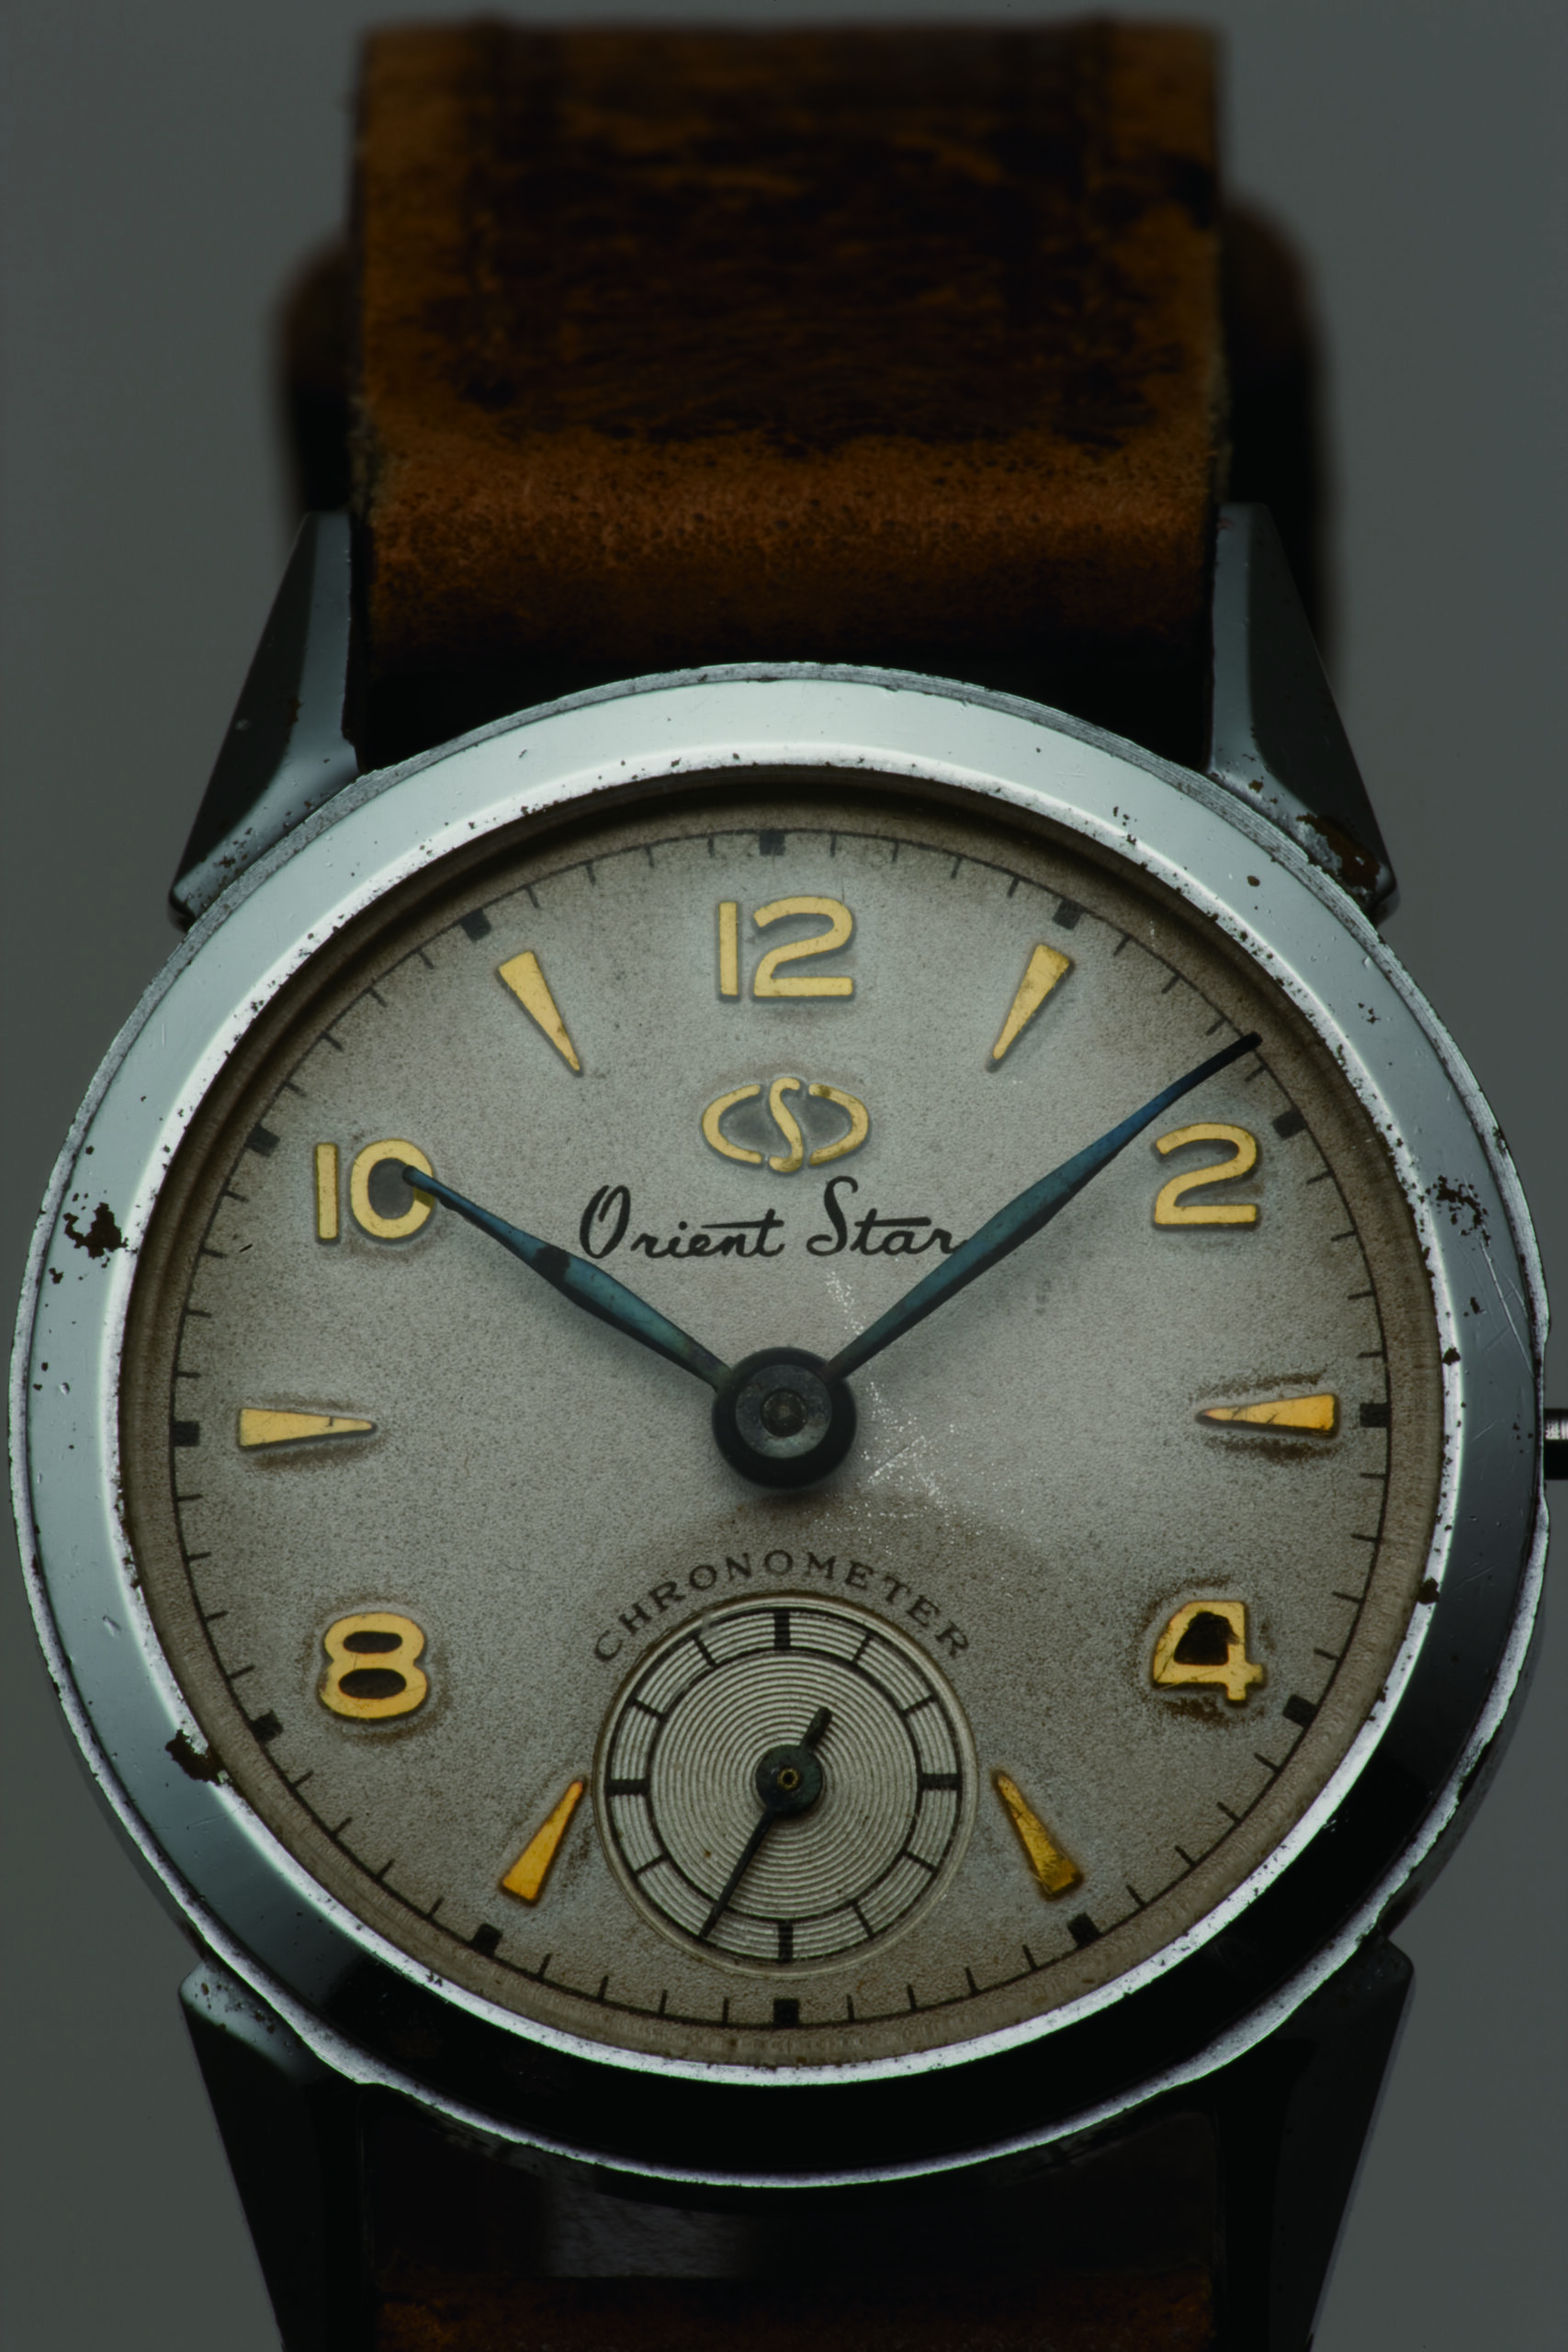 Journey Back Through Time With Orient Watches | aBlogtoWatch